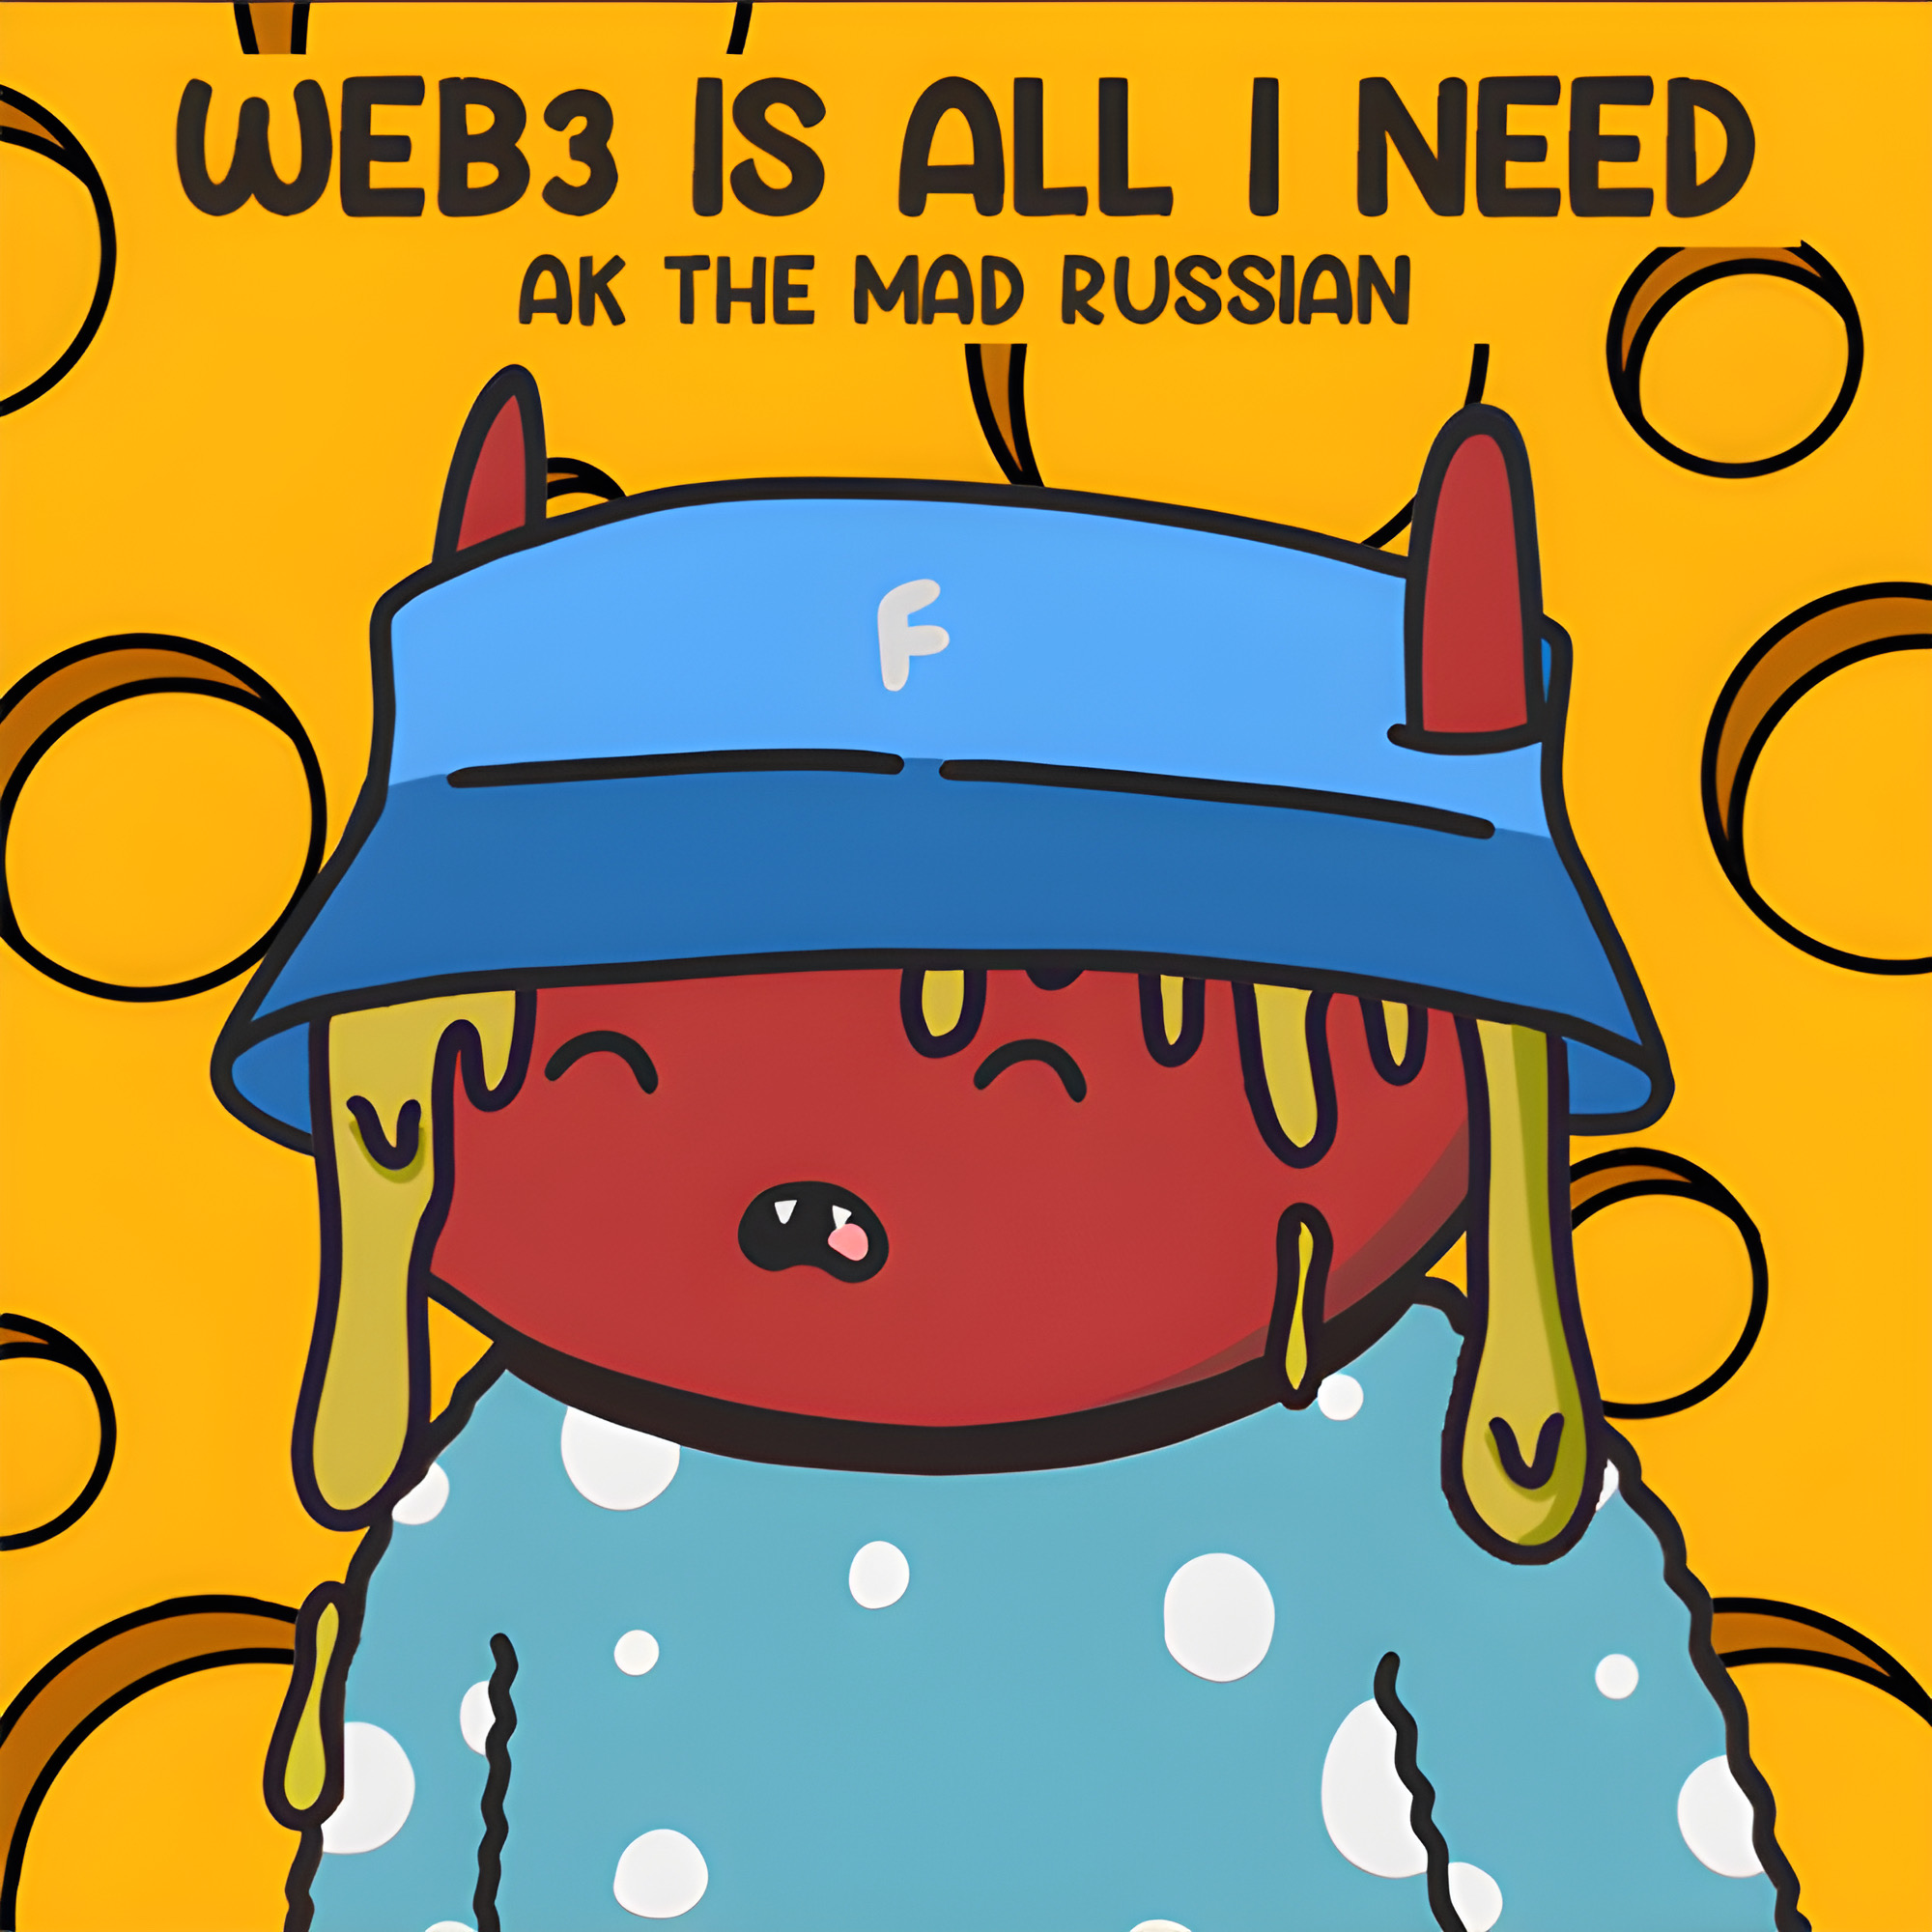 Web3 is all I need